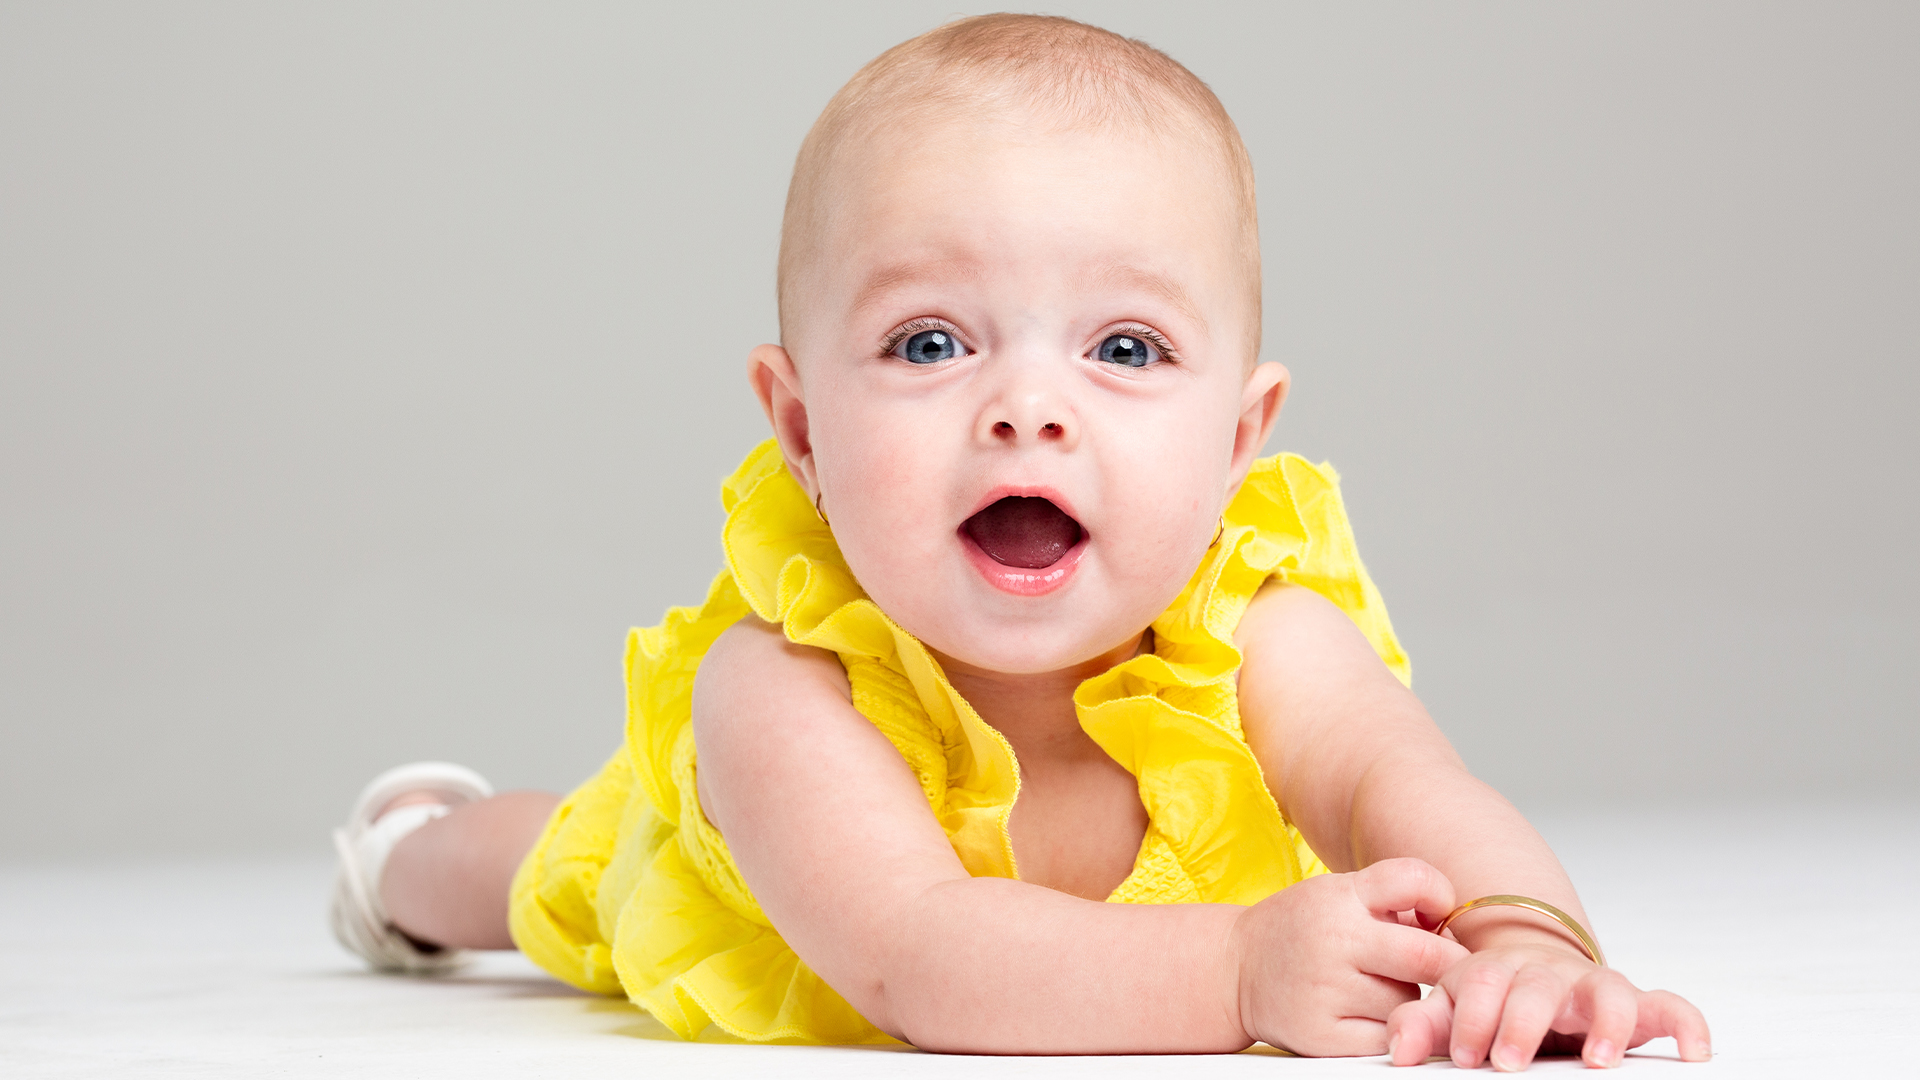 7 Baby Modelling Tips for Parents